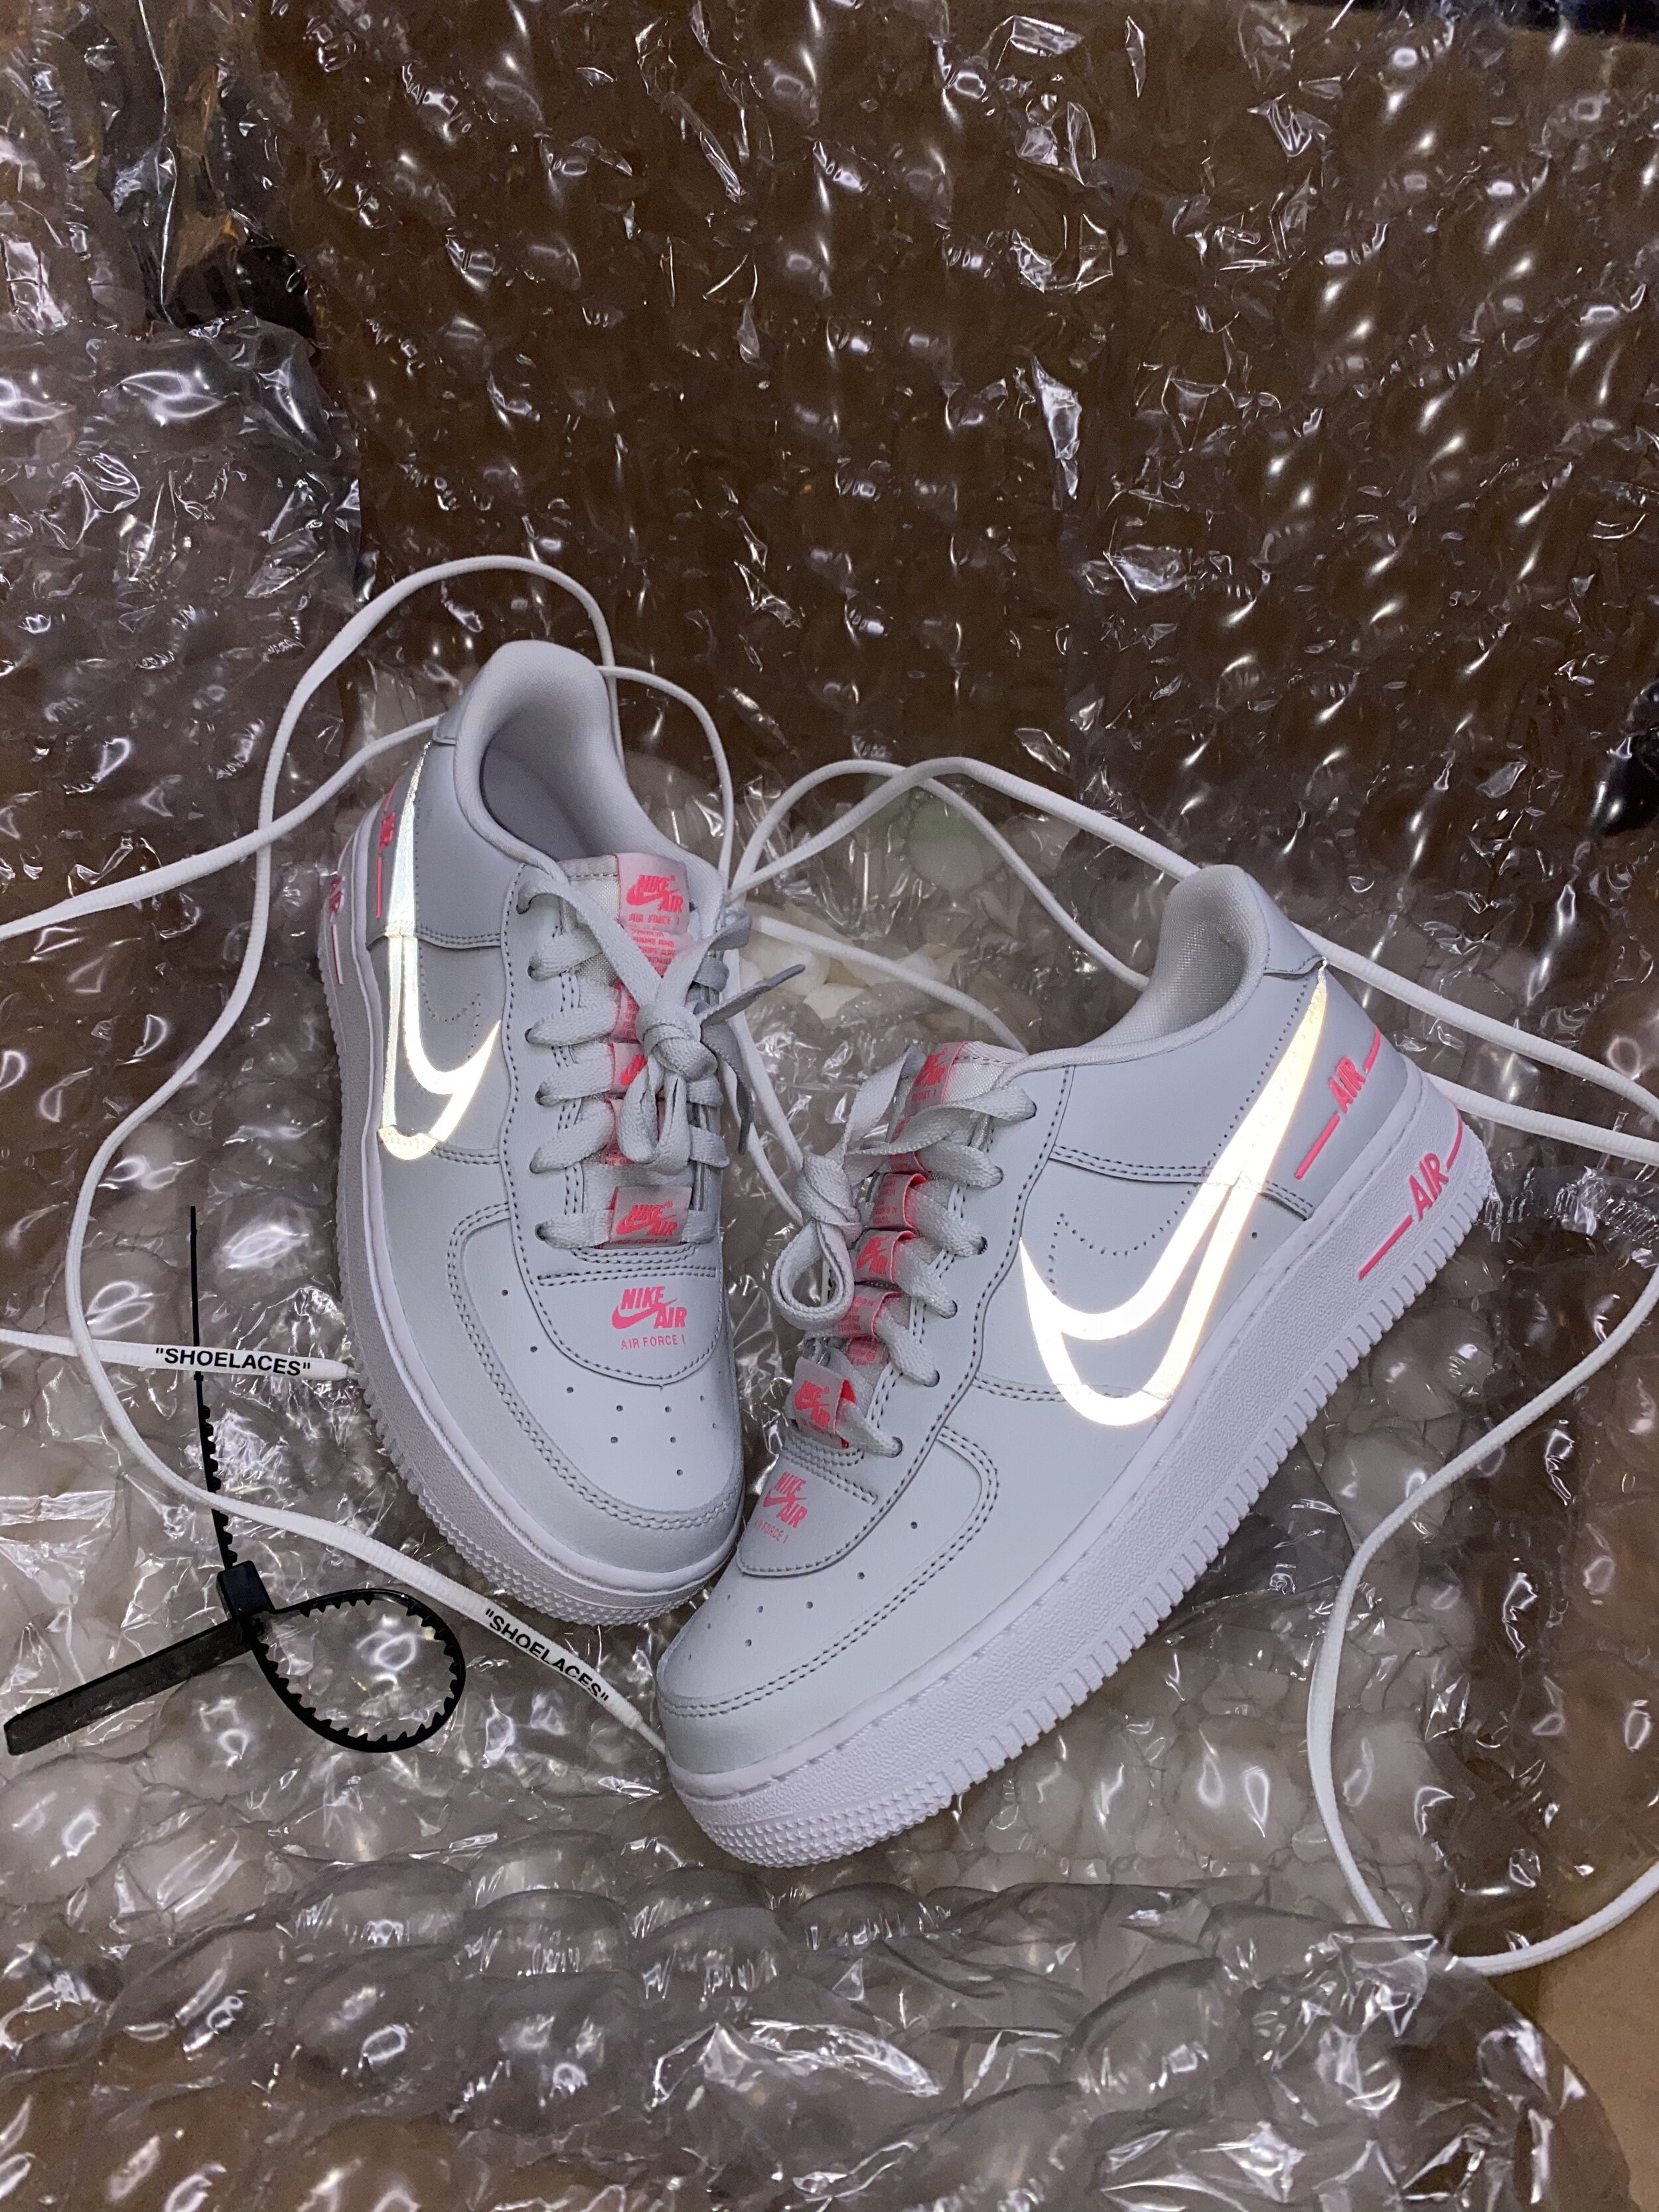 pink and grey air force 1